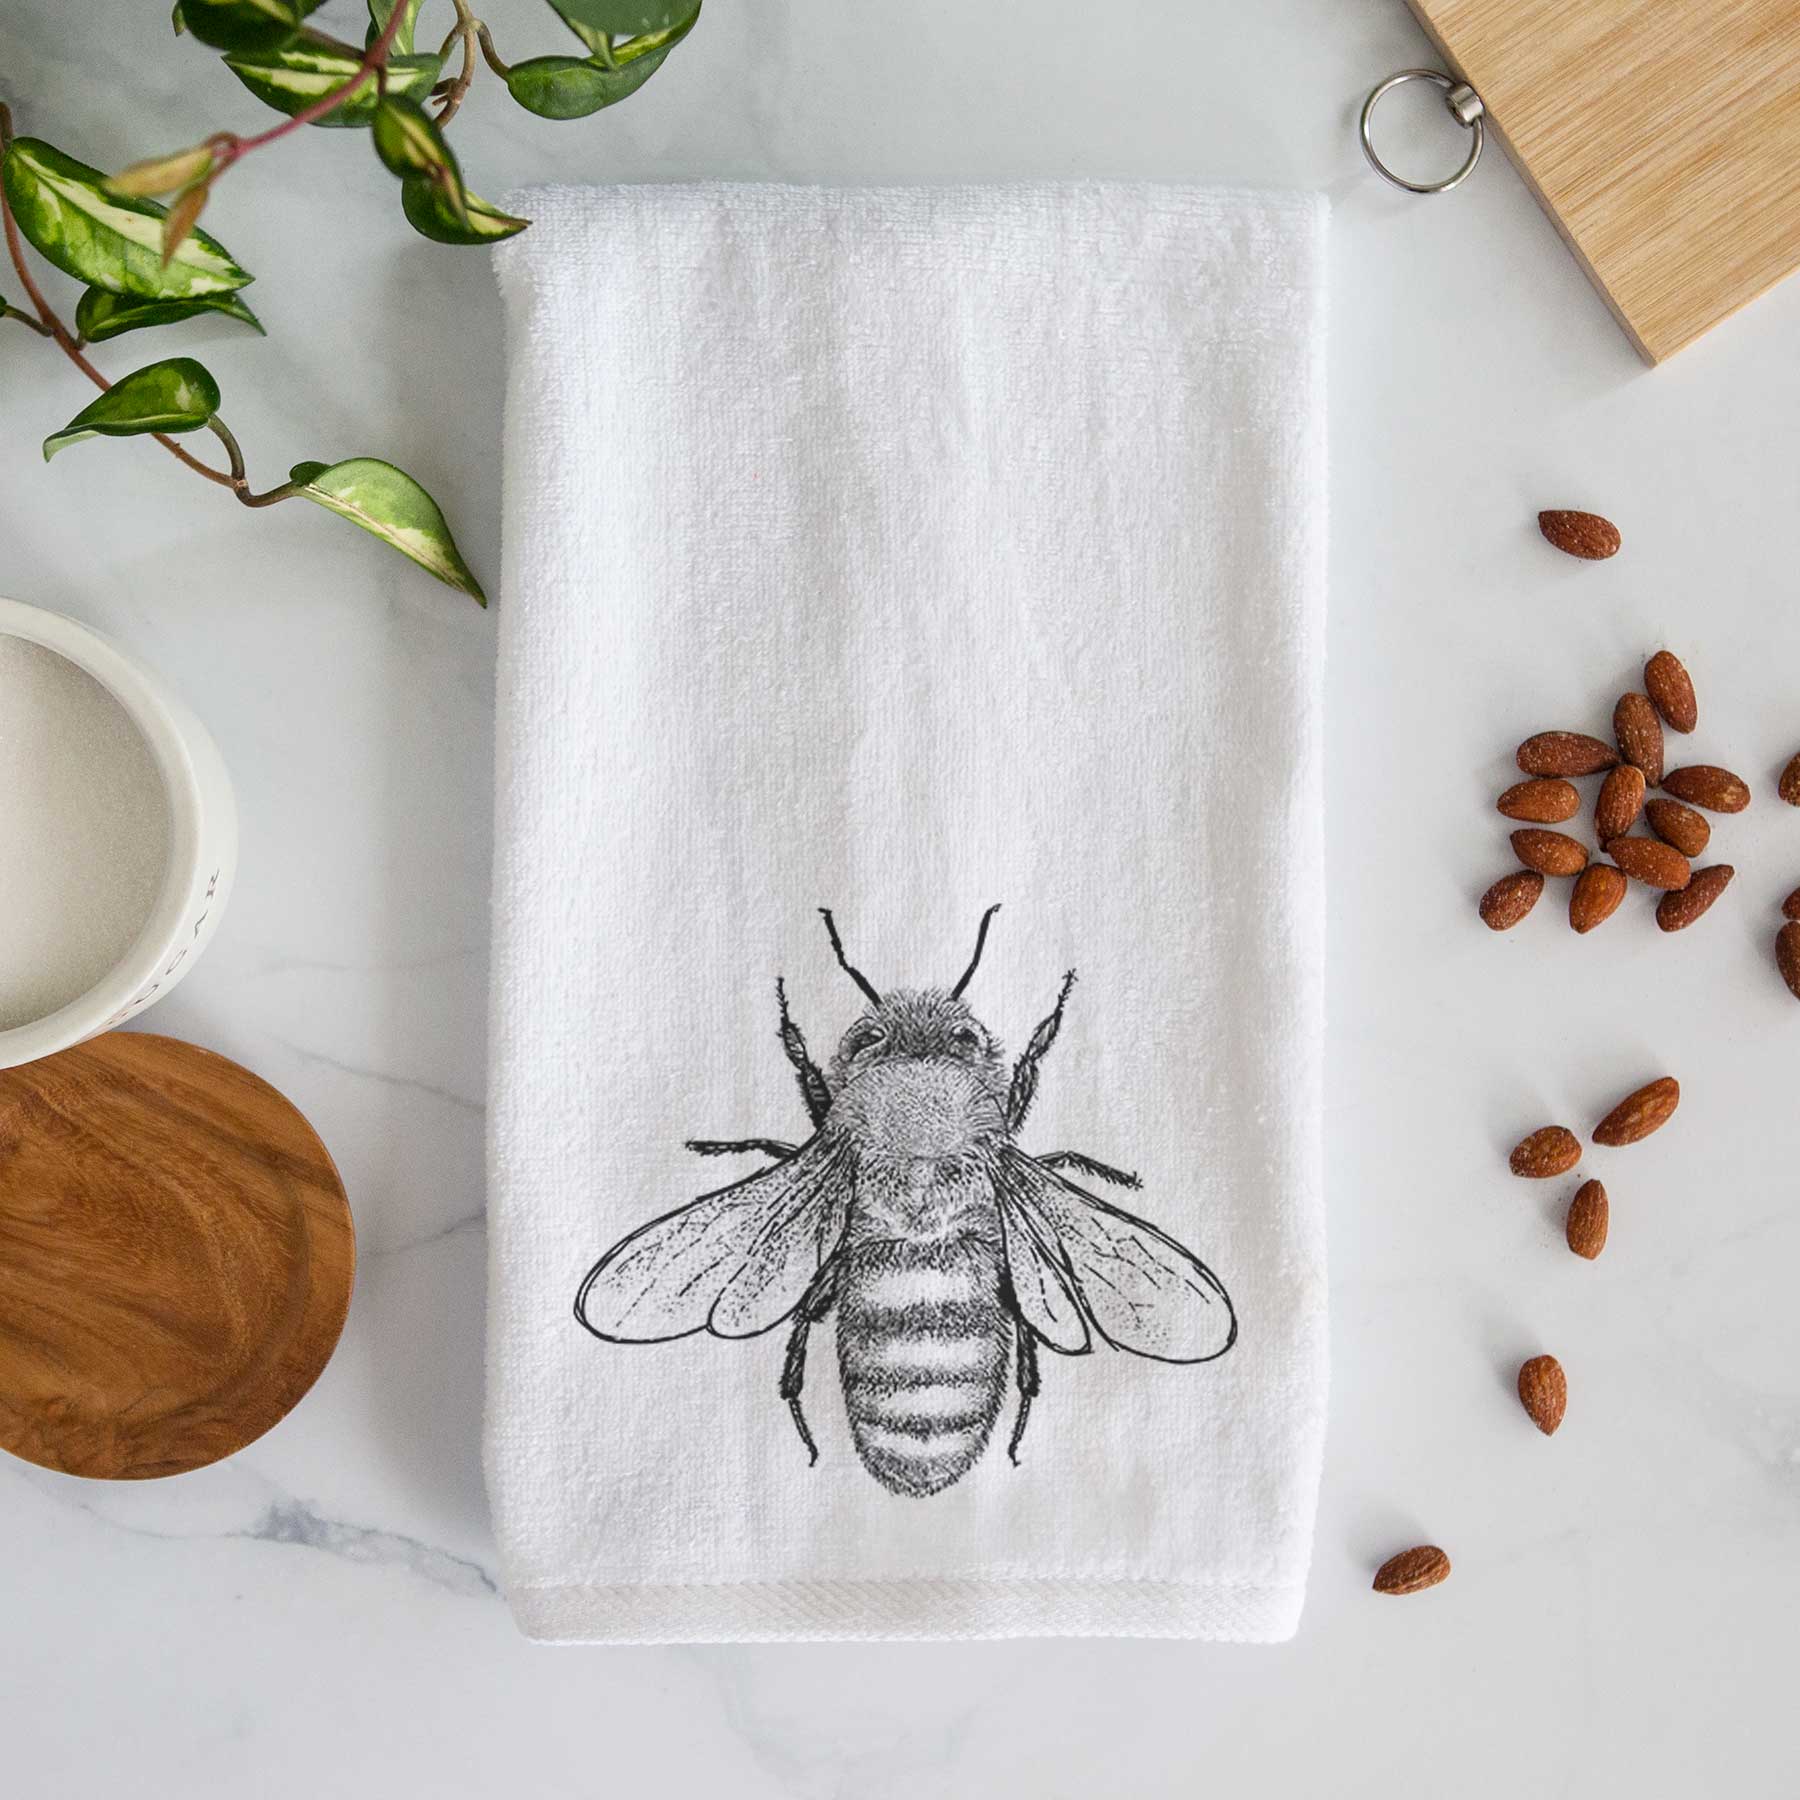 8 Great Ideas for Hanging Paper Towels • Queen Bee of Honey Dos